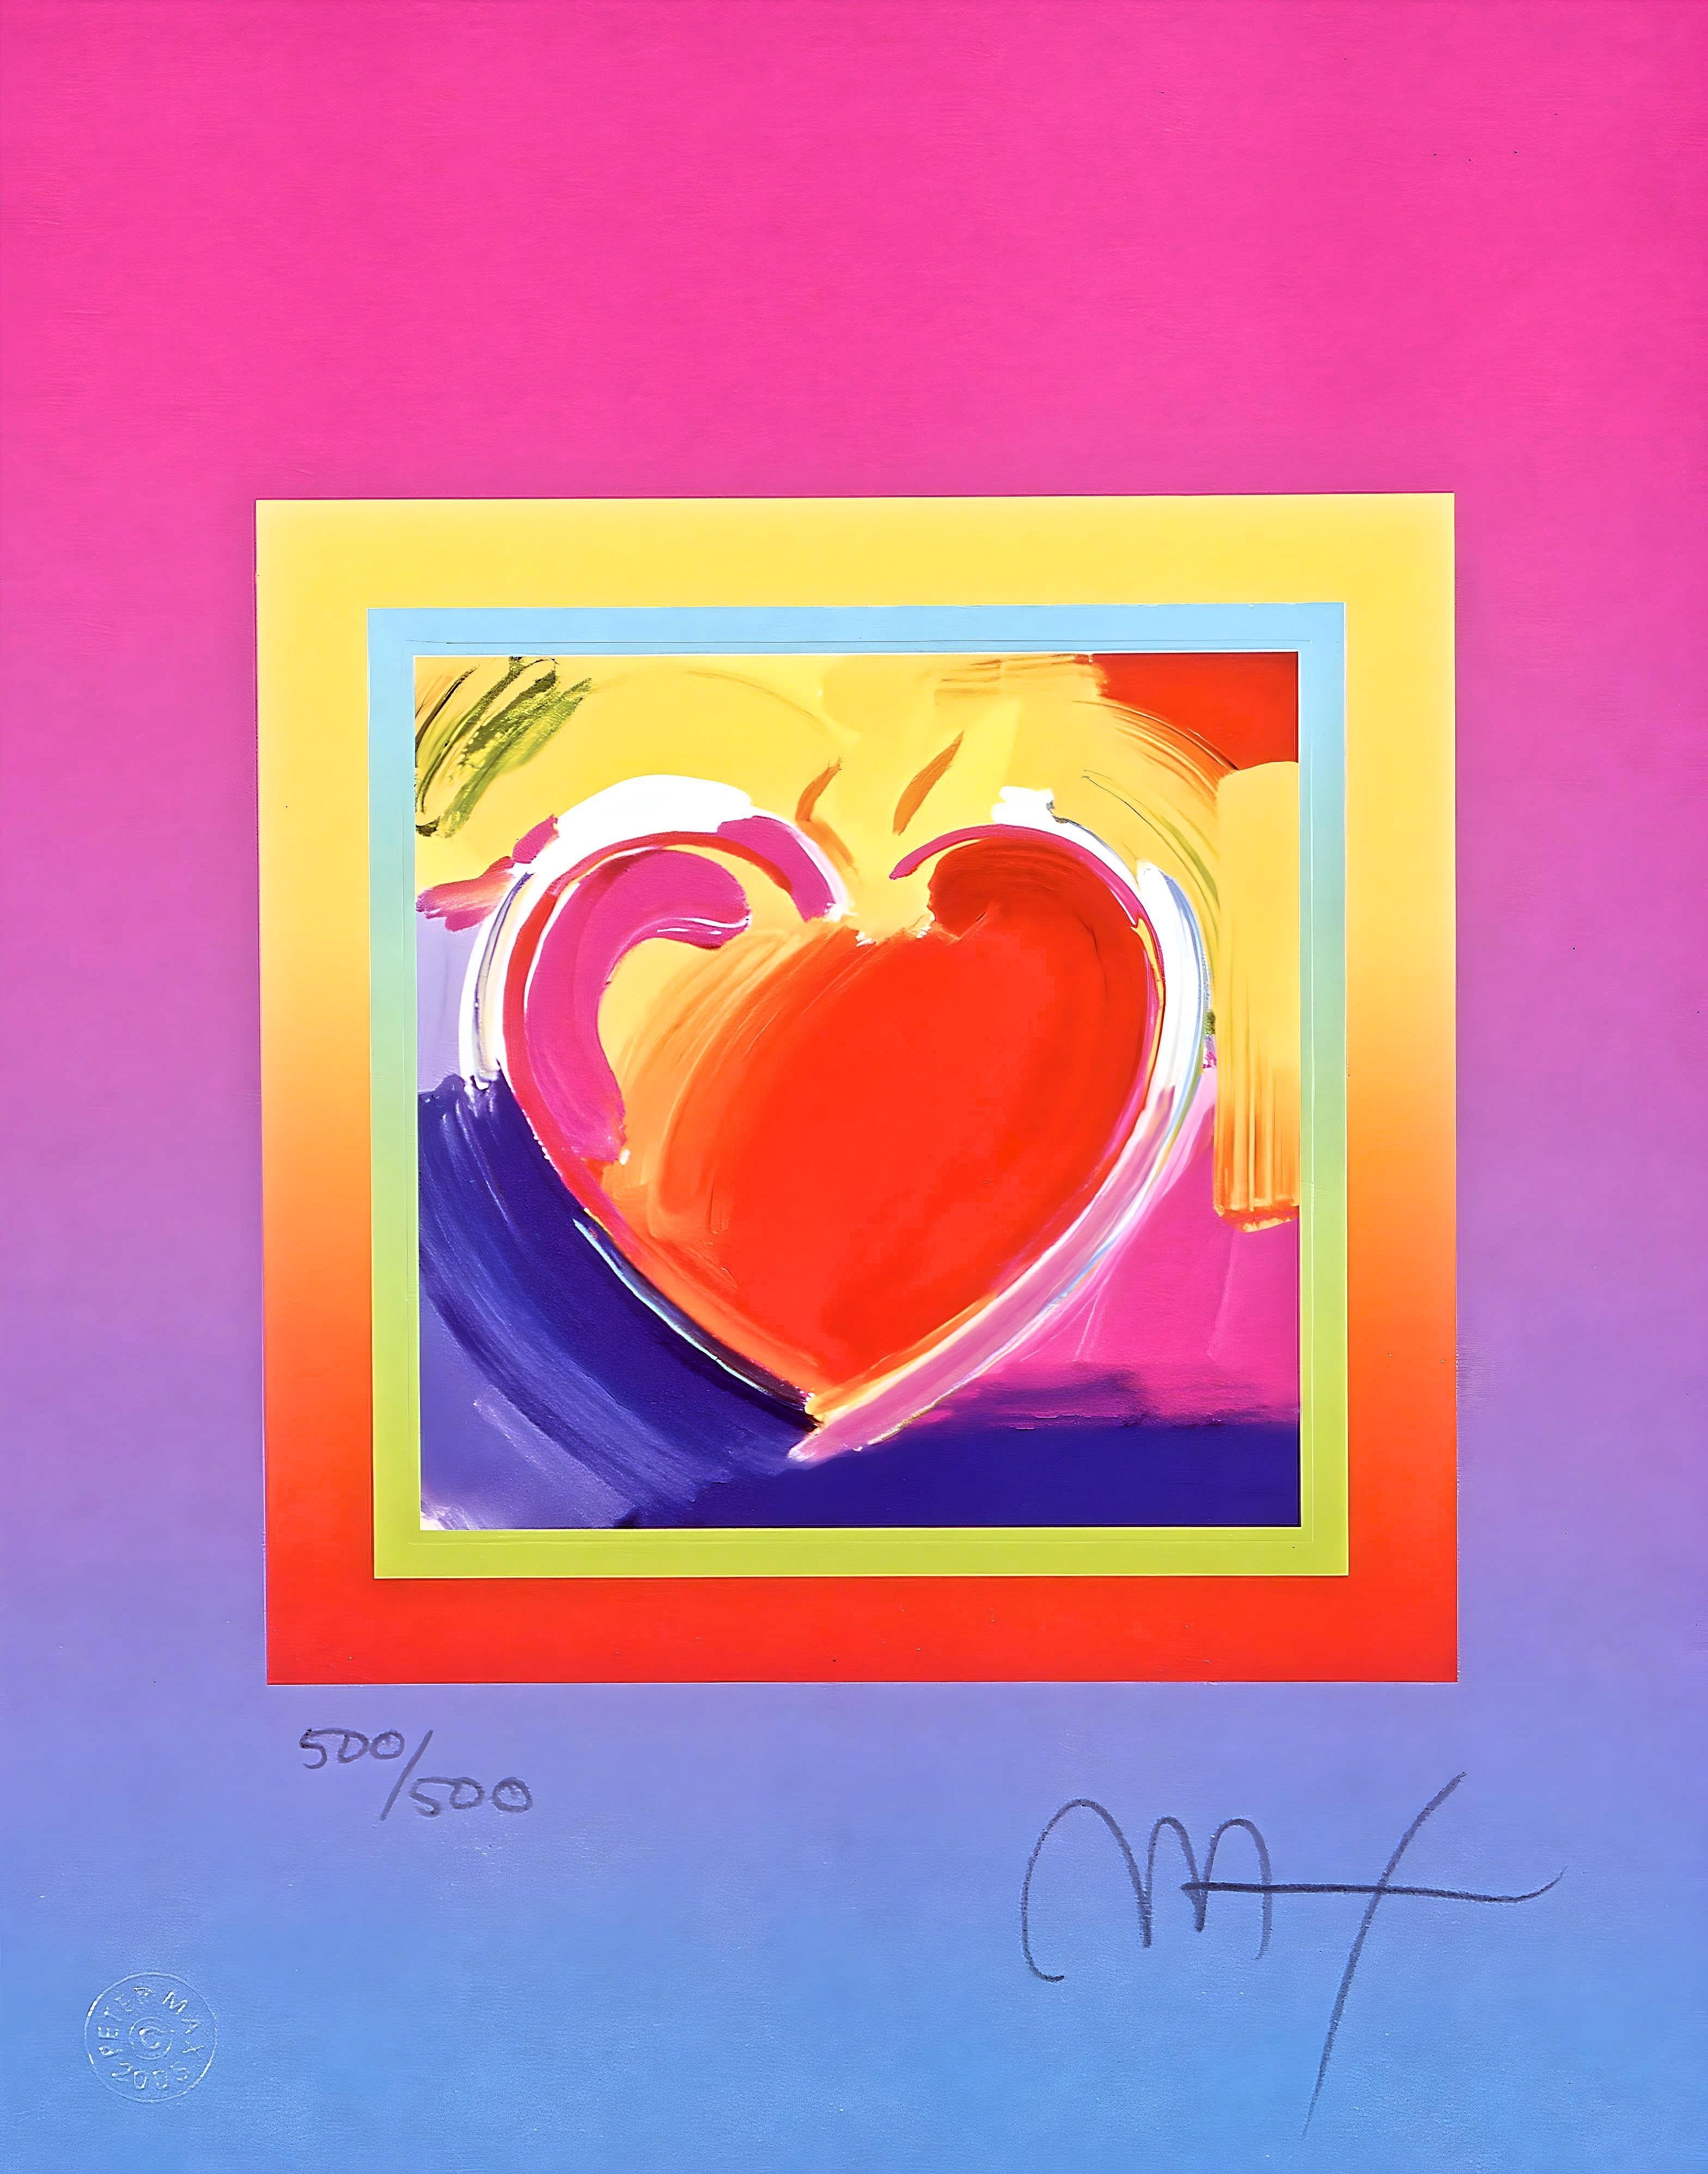 Artist: Peter Max (1937)
Title: Heart on Blends
Year: 2005
Edition: 500/500, plus proofs
Medium: Lithograph on Lustro Saxony paper
Size: 12.75 x 10 inches
Condition: Excellent
Inscription: Signed and numbered by the artist.
Notes: Published by Via